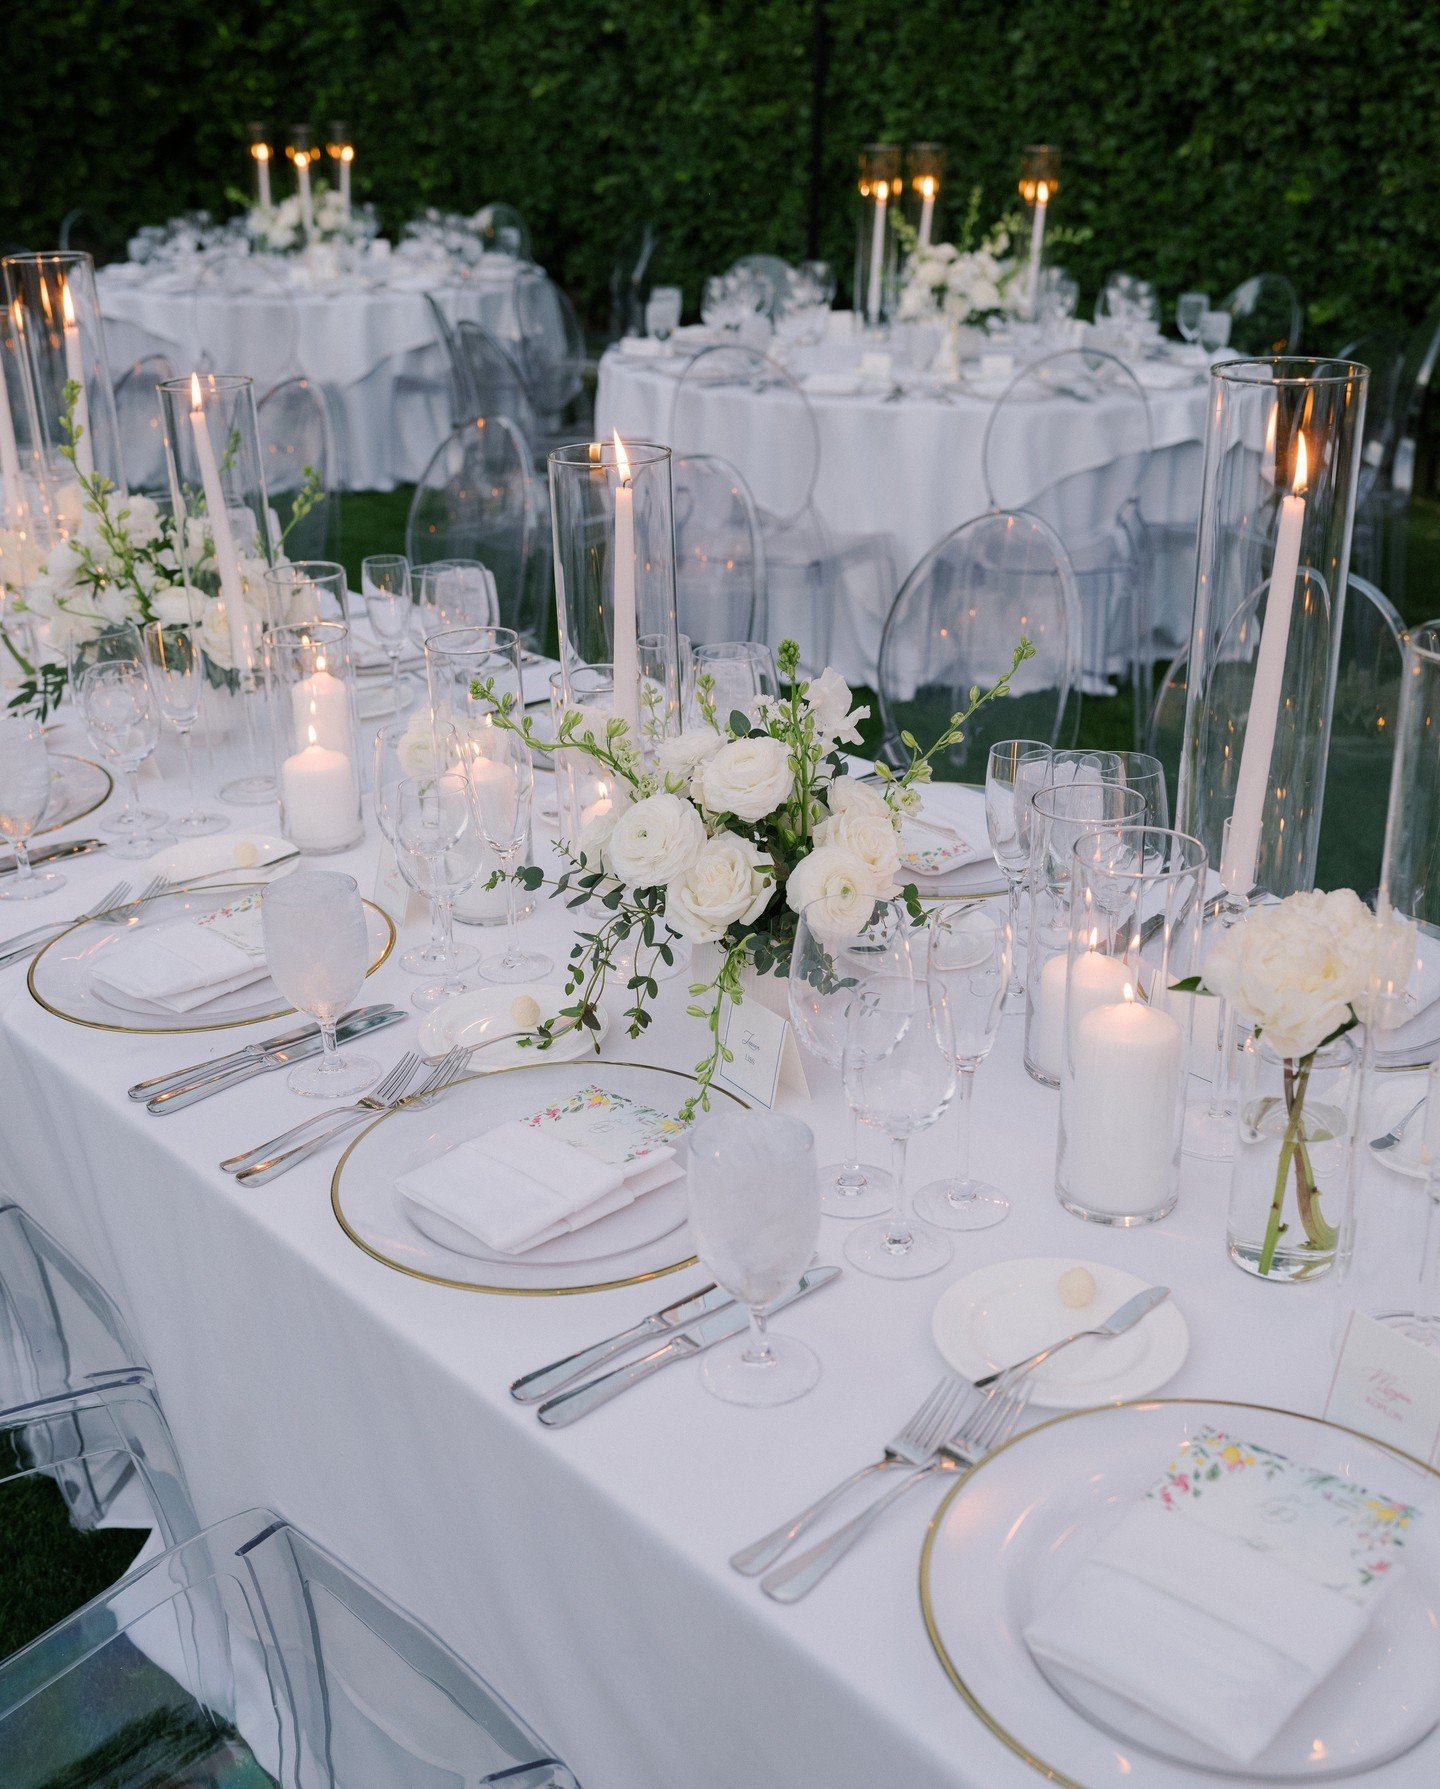 A candlelit reception 🤍 Here&rsquo;s to a night filled with romance and bliss.
...
#artisaninspiration #palmspringswedding #artisanevents #artisaneventfloraldecor #weddingreception #champagne #glassware